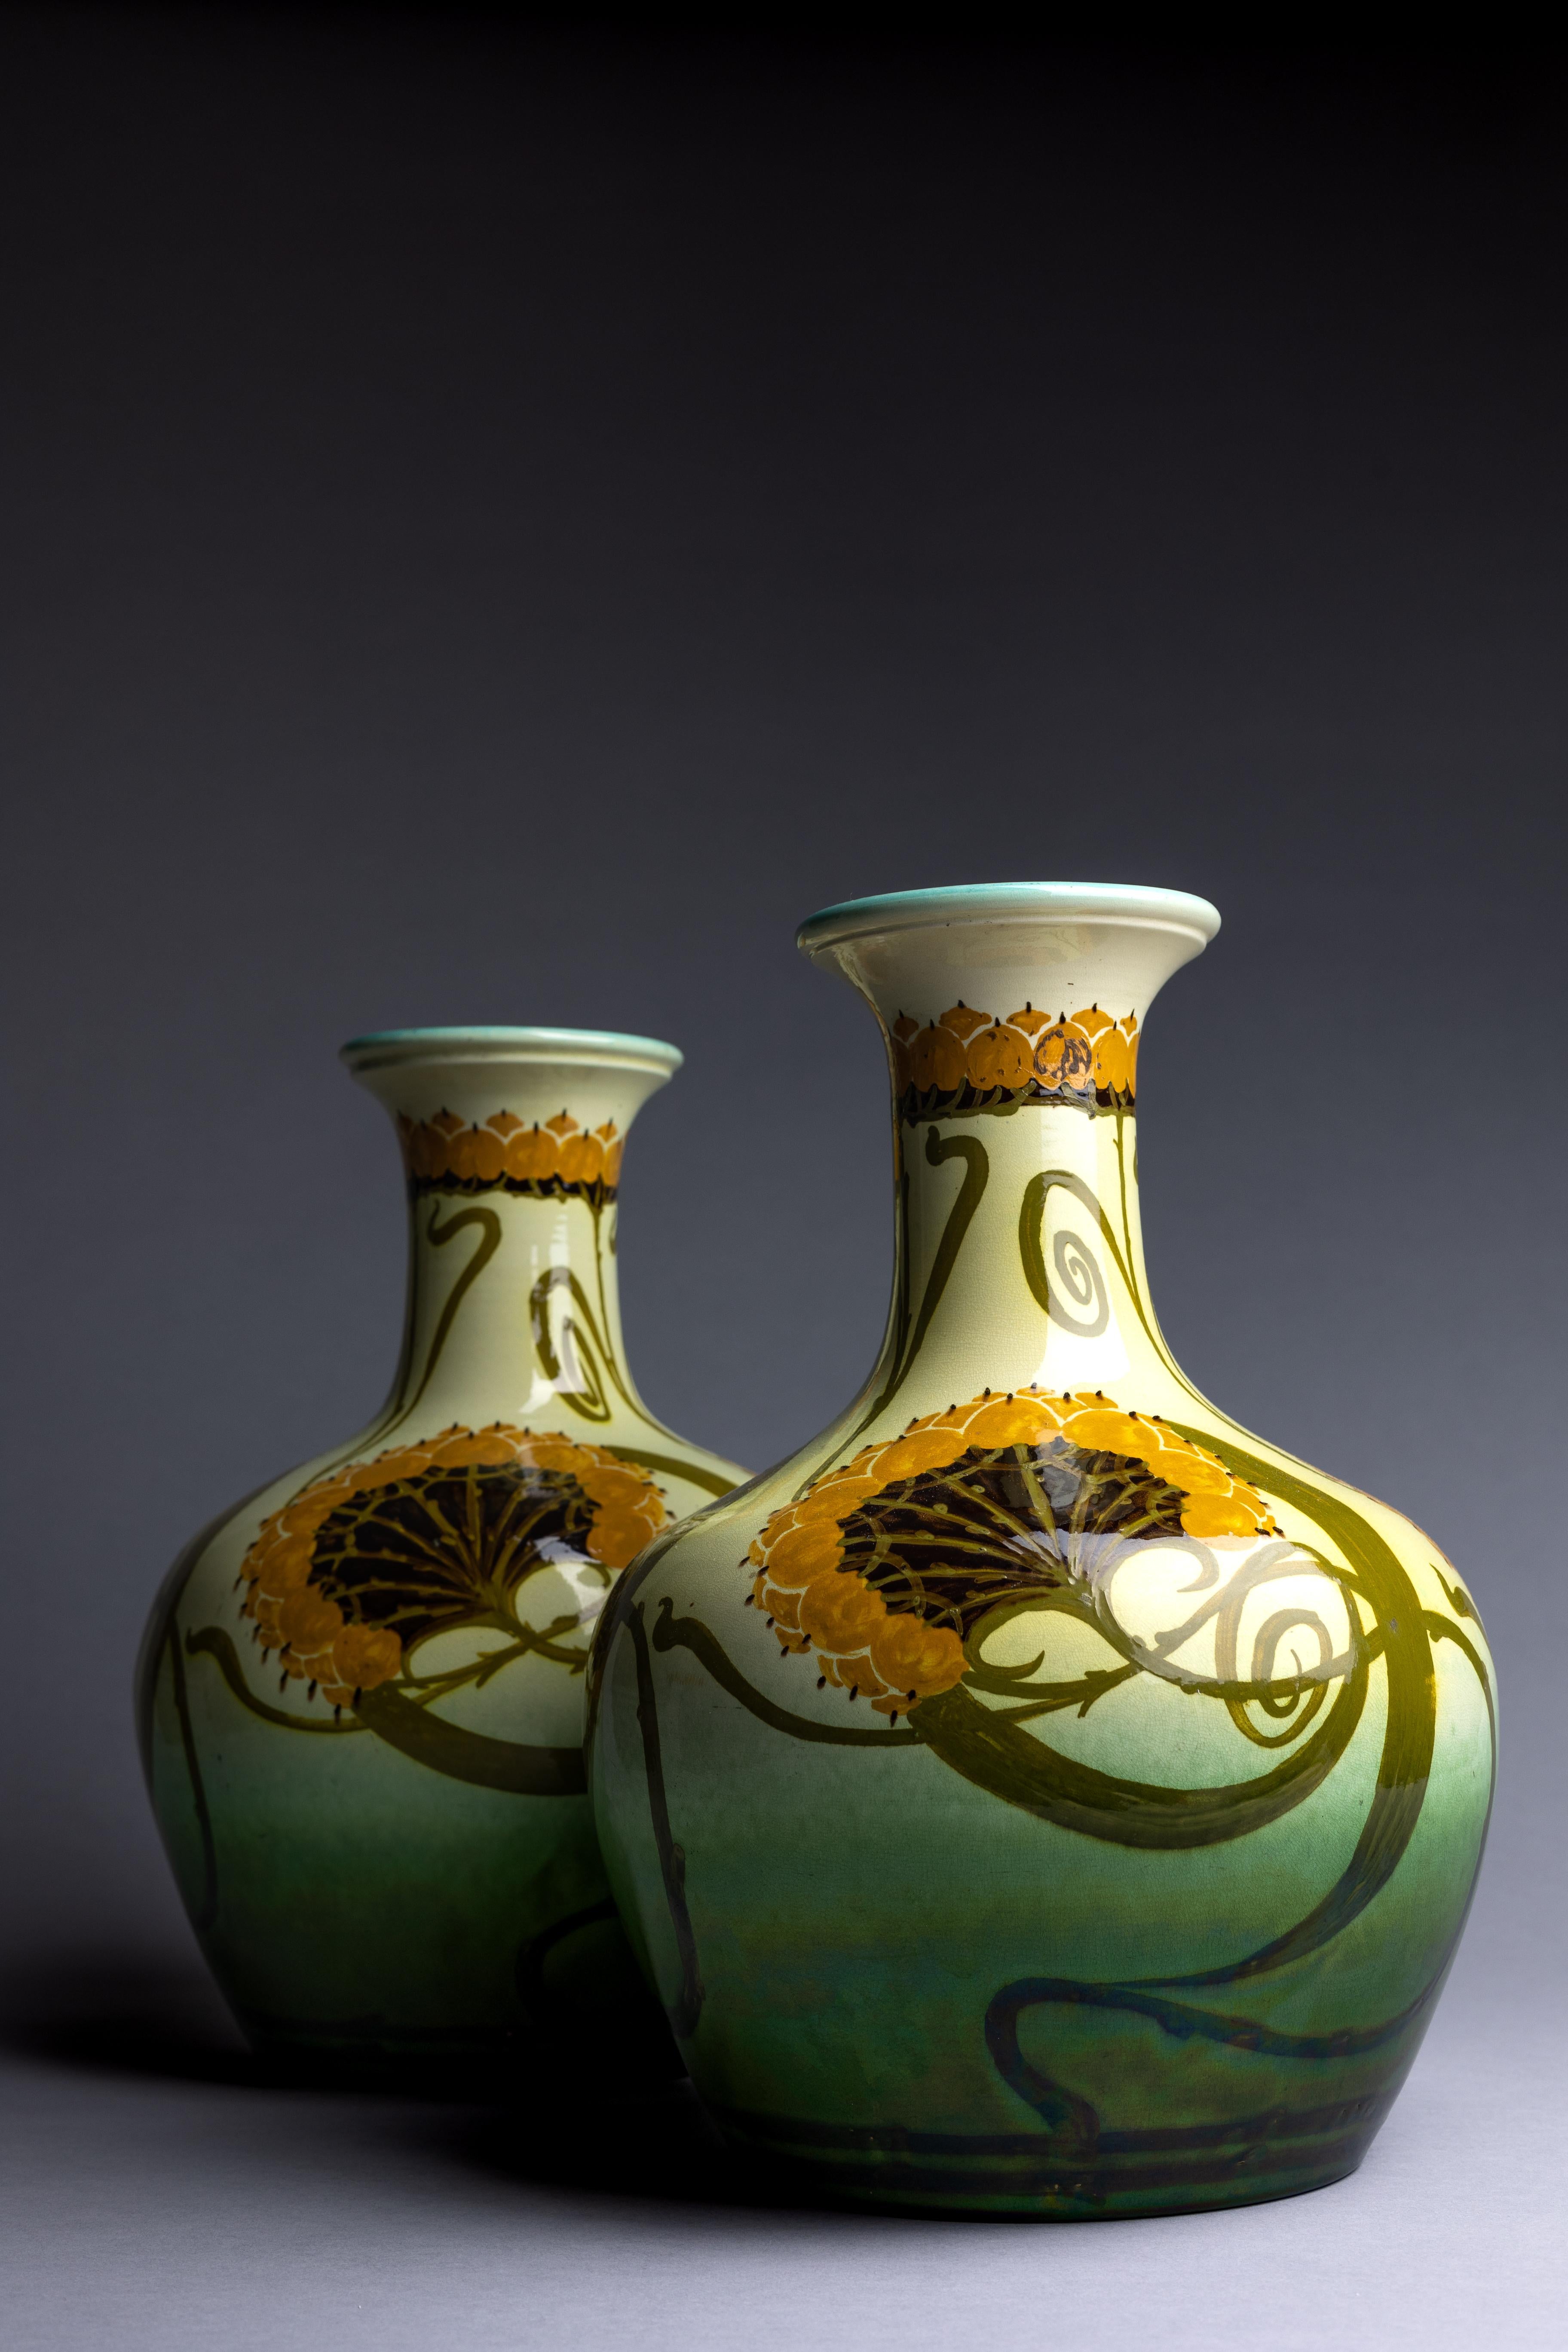 A pair of large Arts & Crafts vases hand-painted by Clarissa Ault circa 1890.

This pair of Arts & Crafts pottery vases were hand-painted by Clarissa Ault, daughter of English ceramicist William Ault and encompass a variety of styles from the late